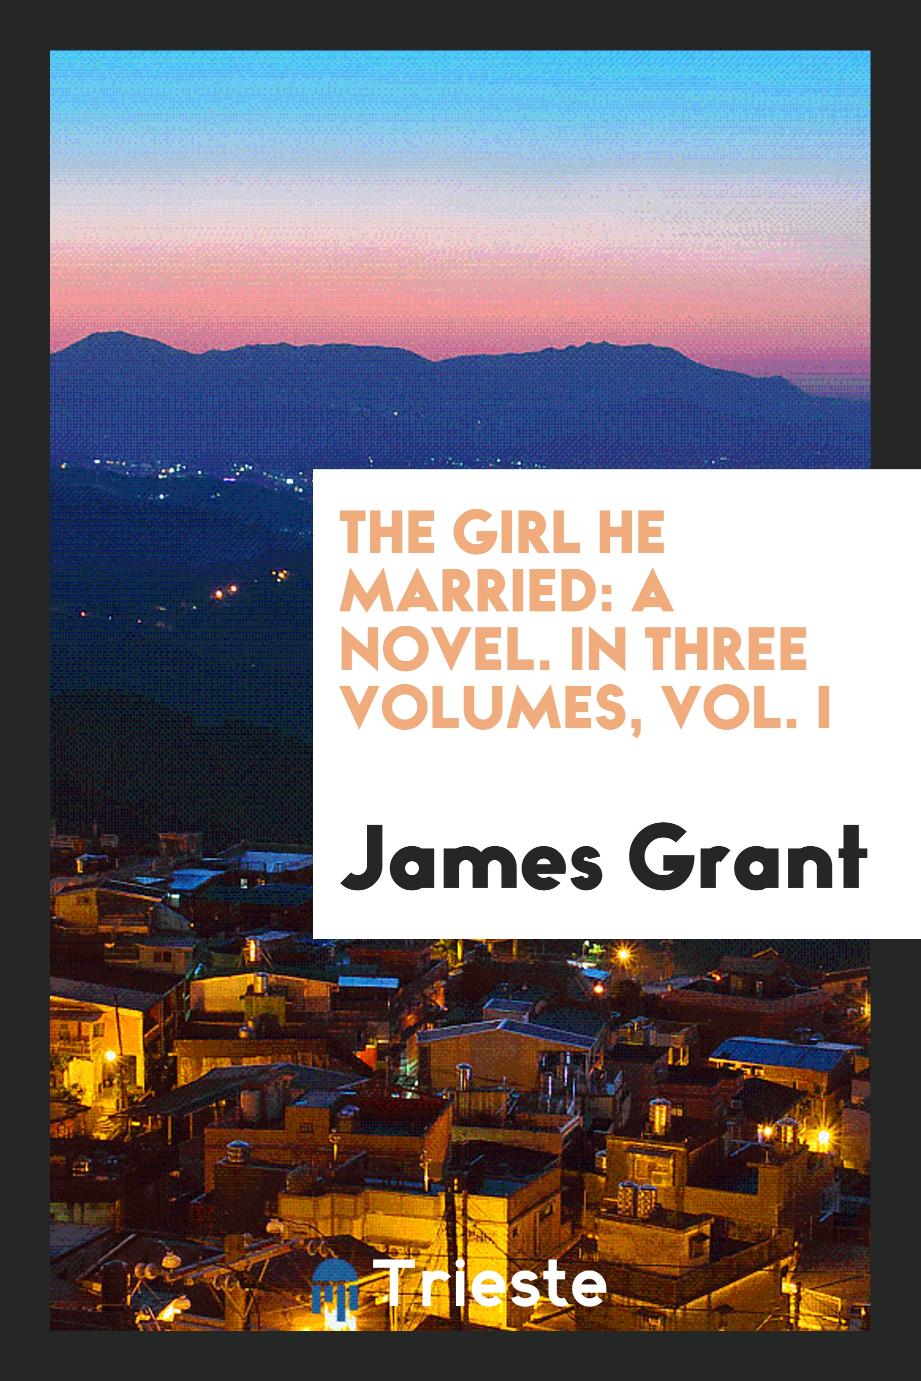 The Girl He Married: A Novel. In Three Volumes, Vol. I